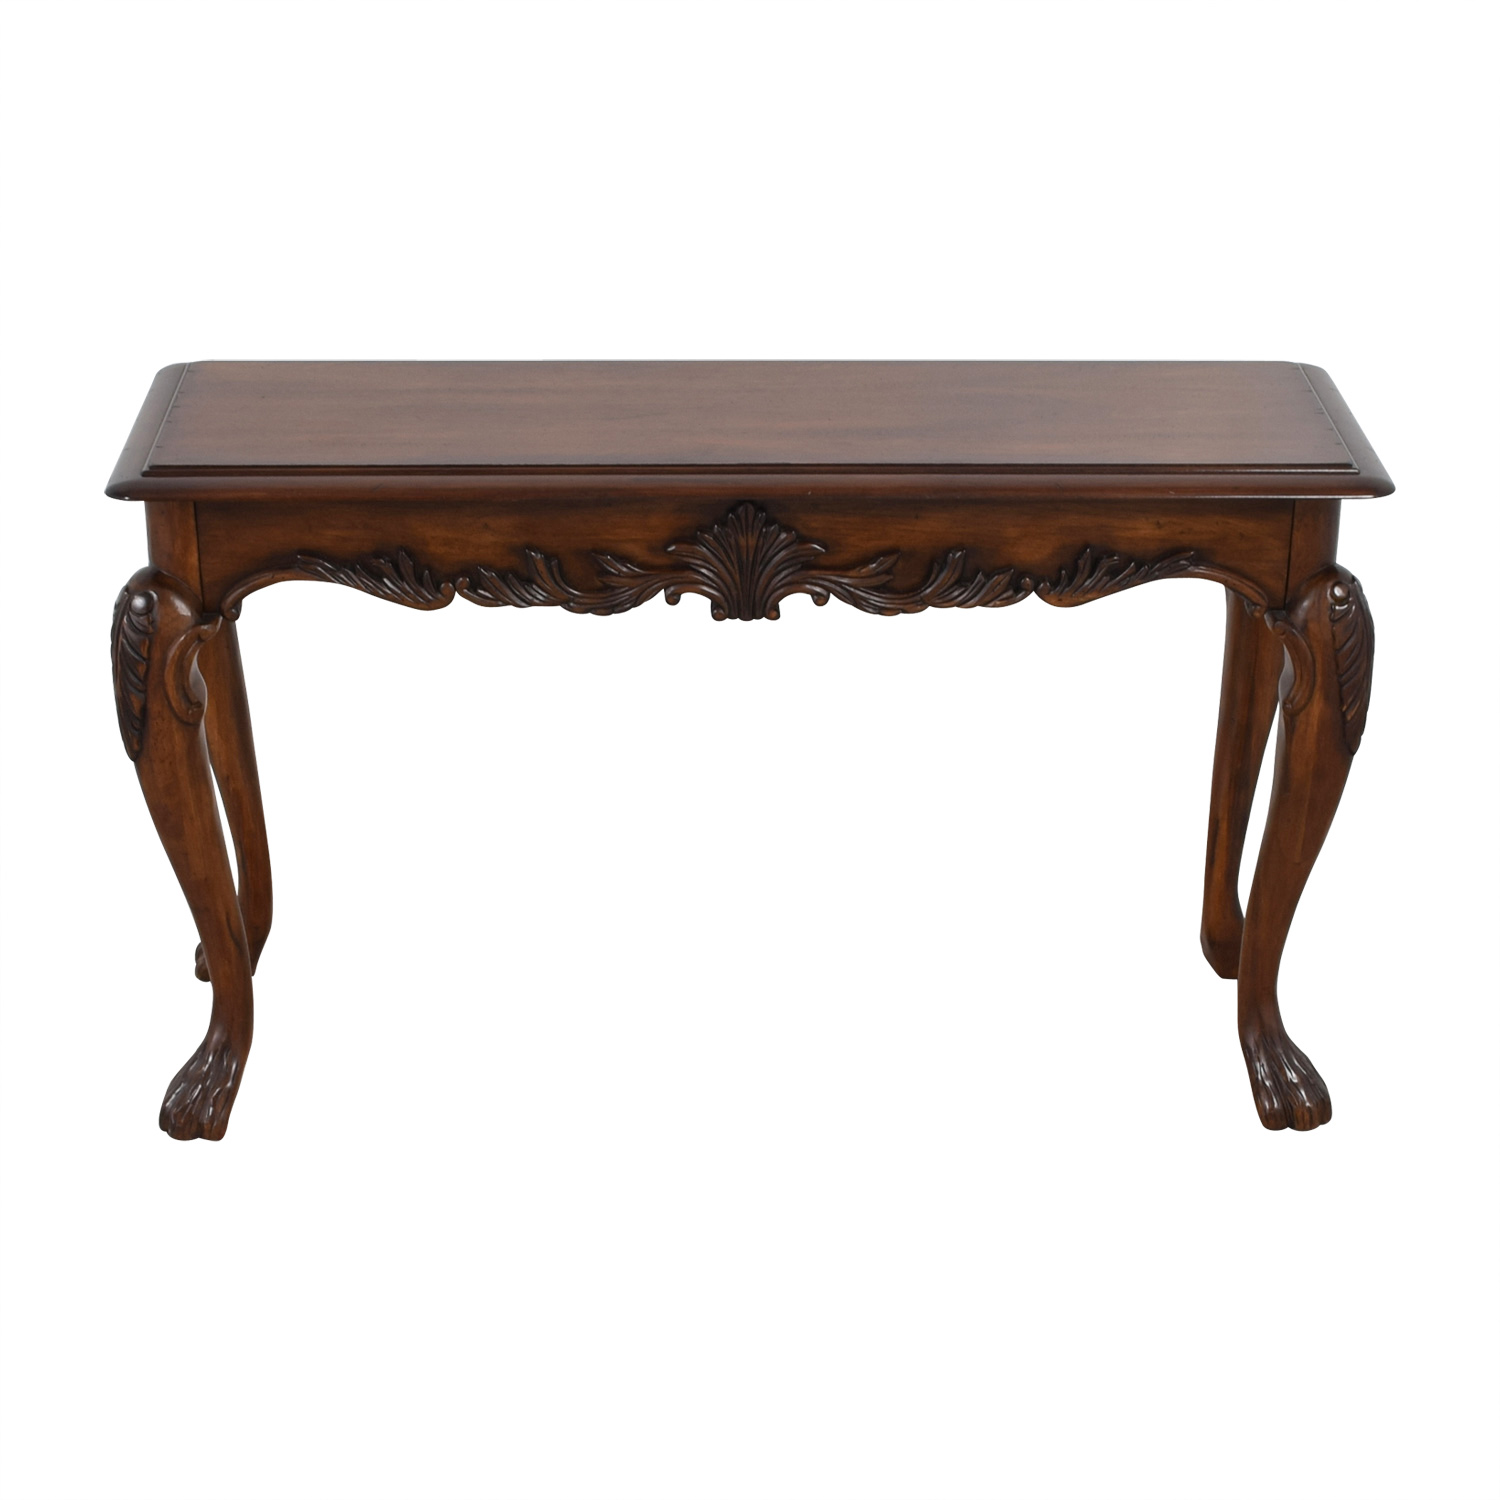 off carved wood sofa table tables used accent pottery barn art with shelves hardwood white and brass coffee navy blue side door bars for laminate flooring yellow home accessories